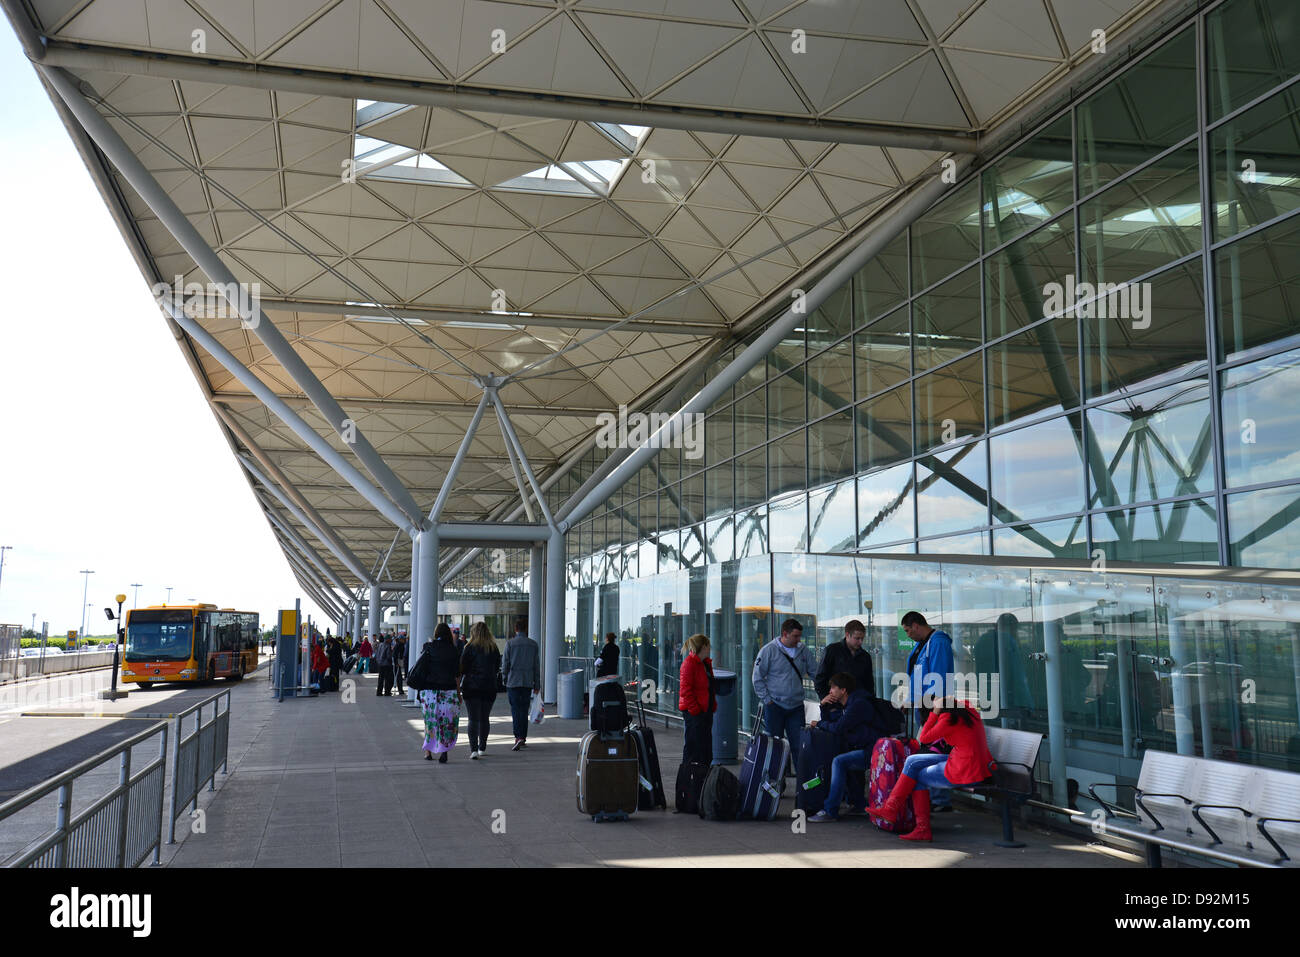 Departure level at Stansted Airport, Stansted Mountfitchet, Essex, England, United Kingdom Stock Photo